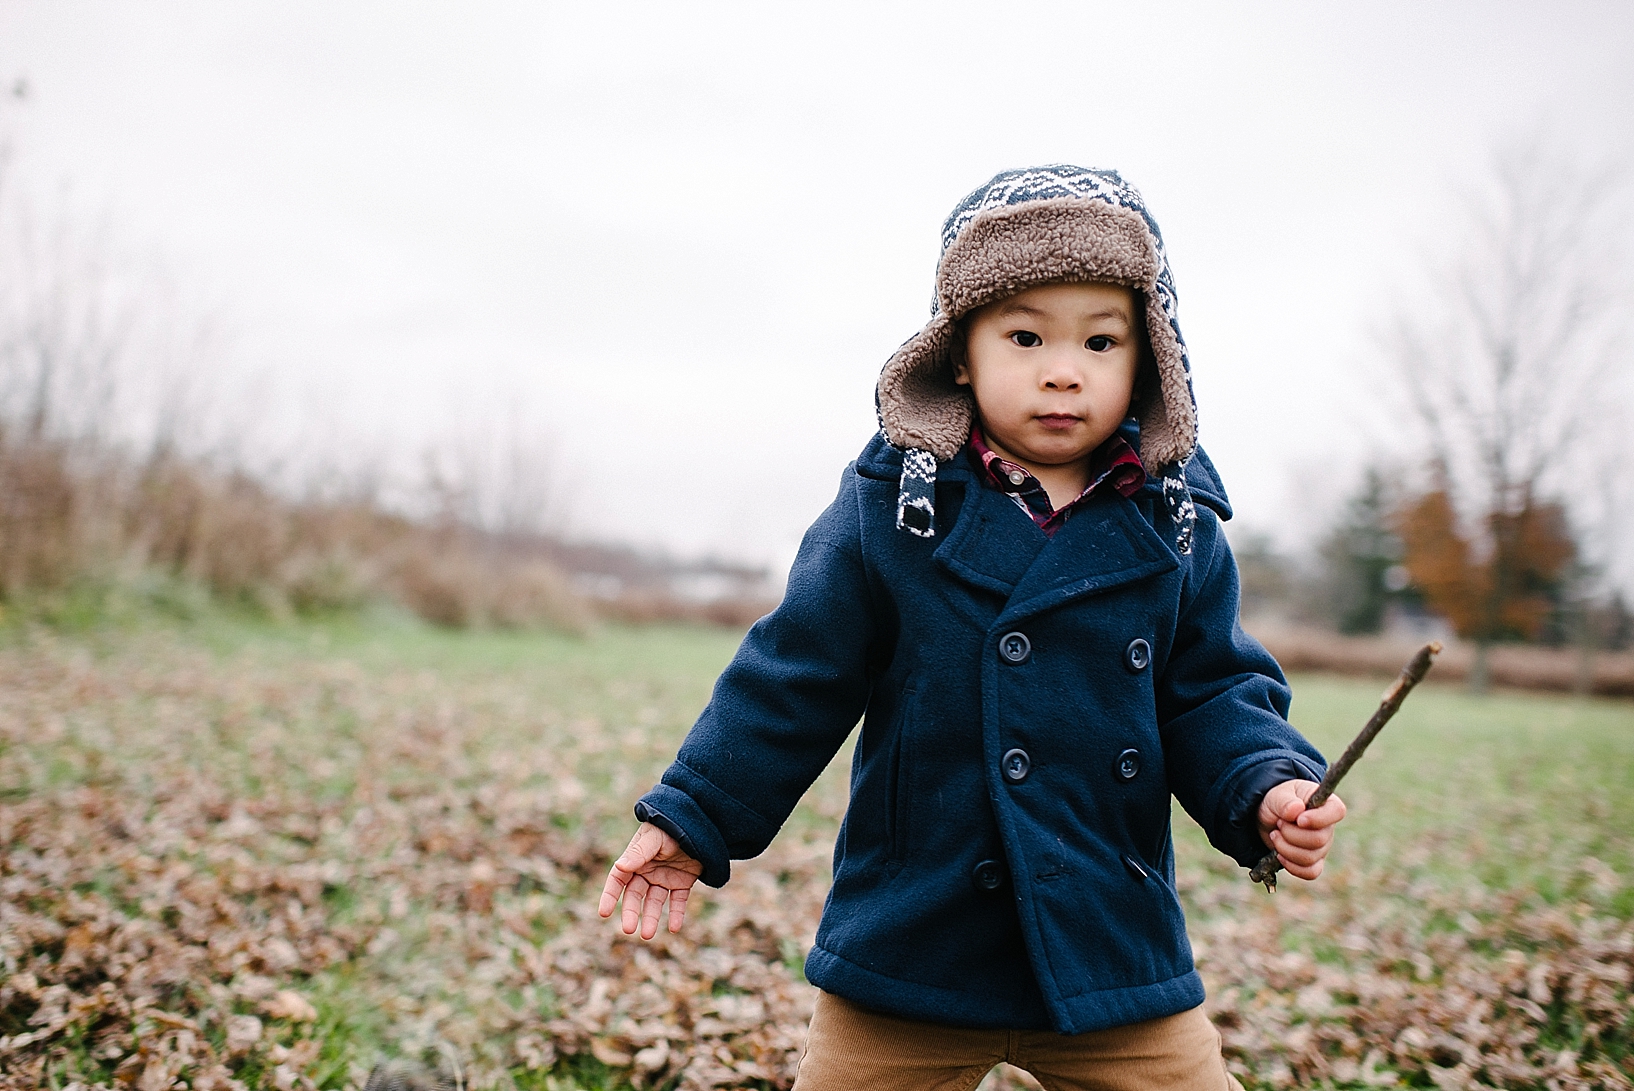 little boy wearing navy pea coat and khakis standing outside in country field in winter